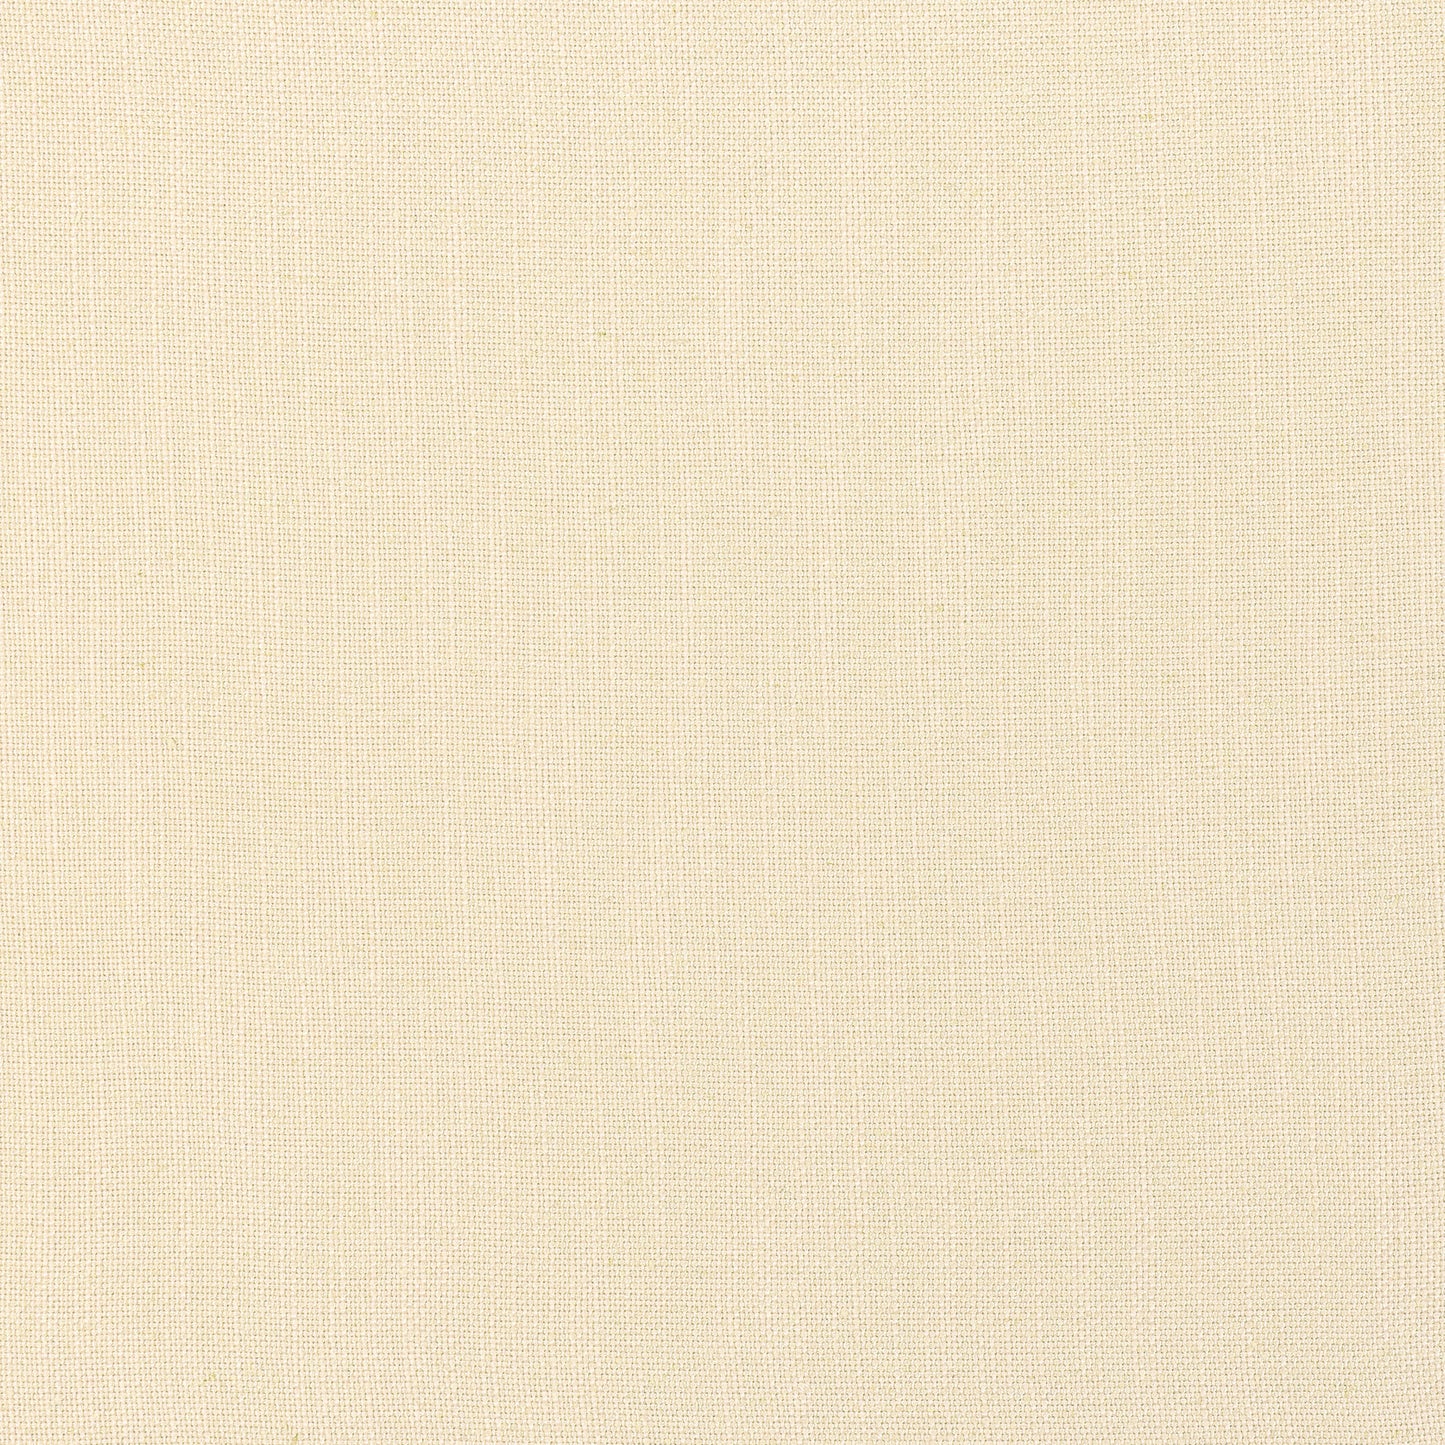 Purchase Thibaut Fabric SKU FWW7631 pattern name Palisade Linen color Almond